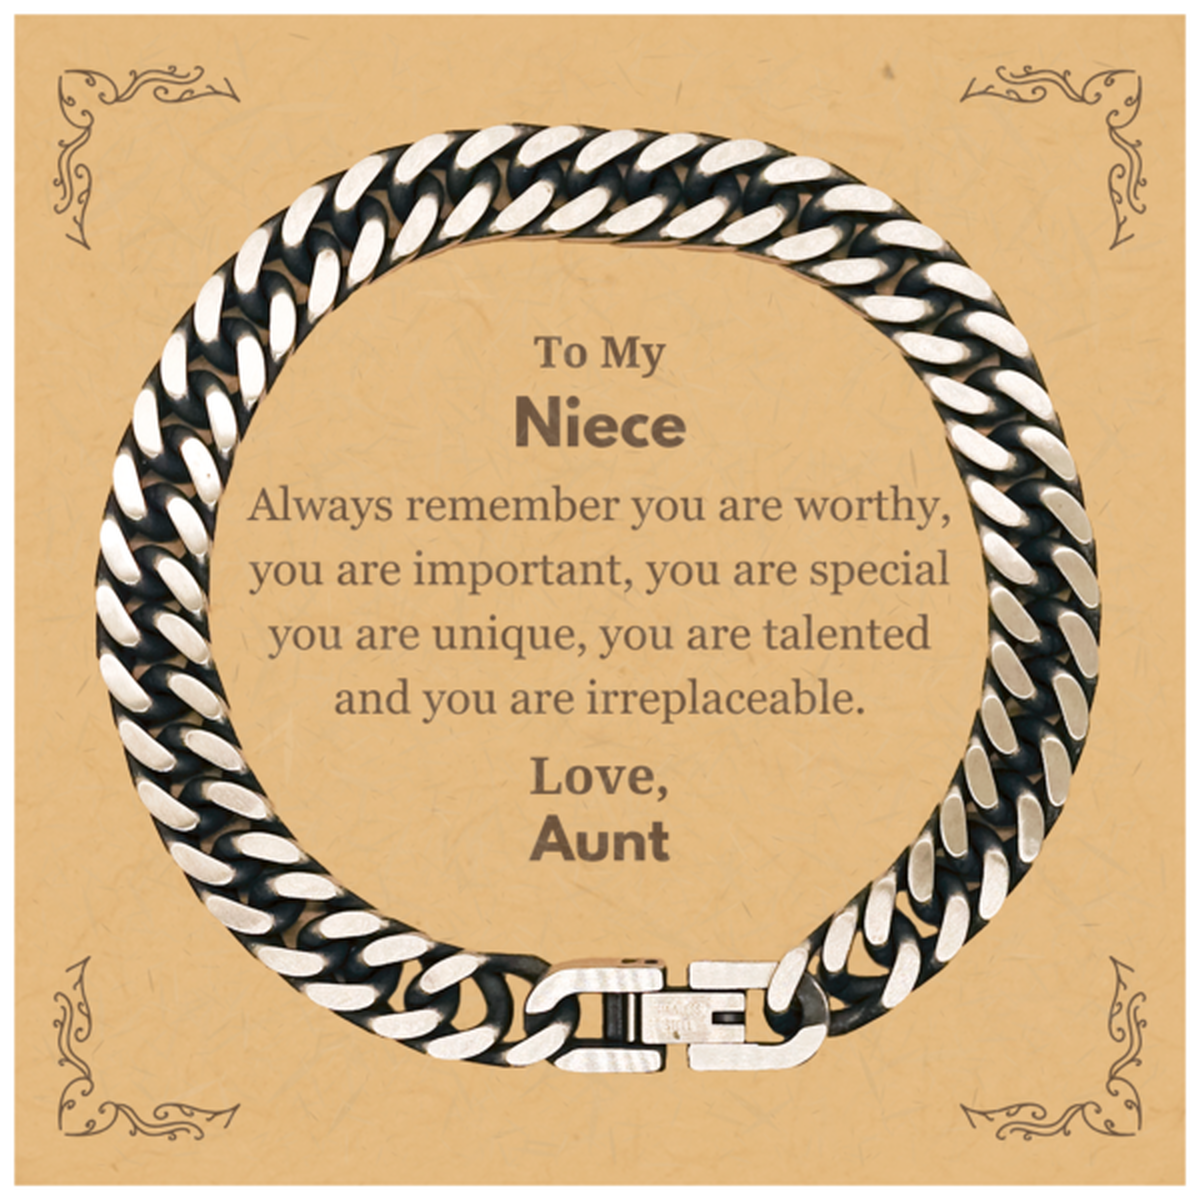 Niece Birthday Gifts from Aunt, Inspirational Cuban Link Chain Bracelet for Niece Christmas Graduation Gifts for Niece Always remember you are worthy, you are important. Love, Aunt